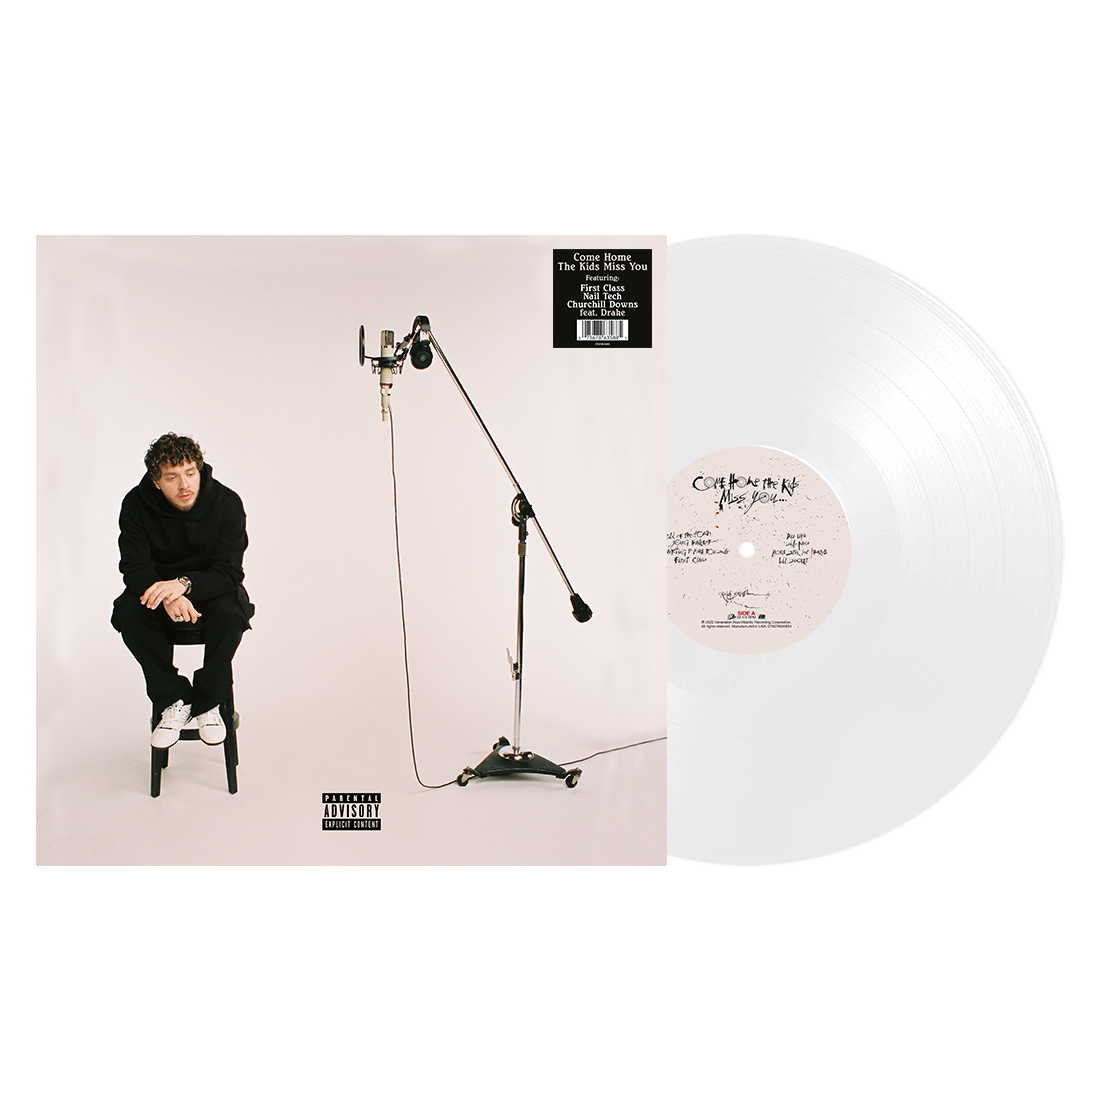 Come Home The Kids Miss You: Limited White Vinyl LP